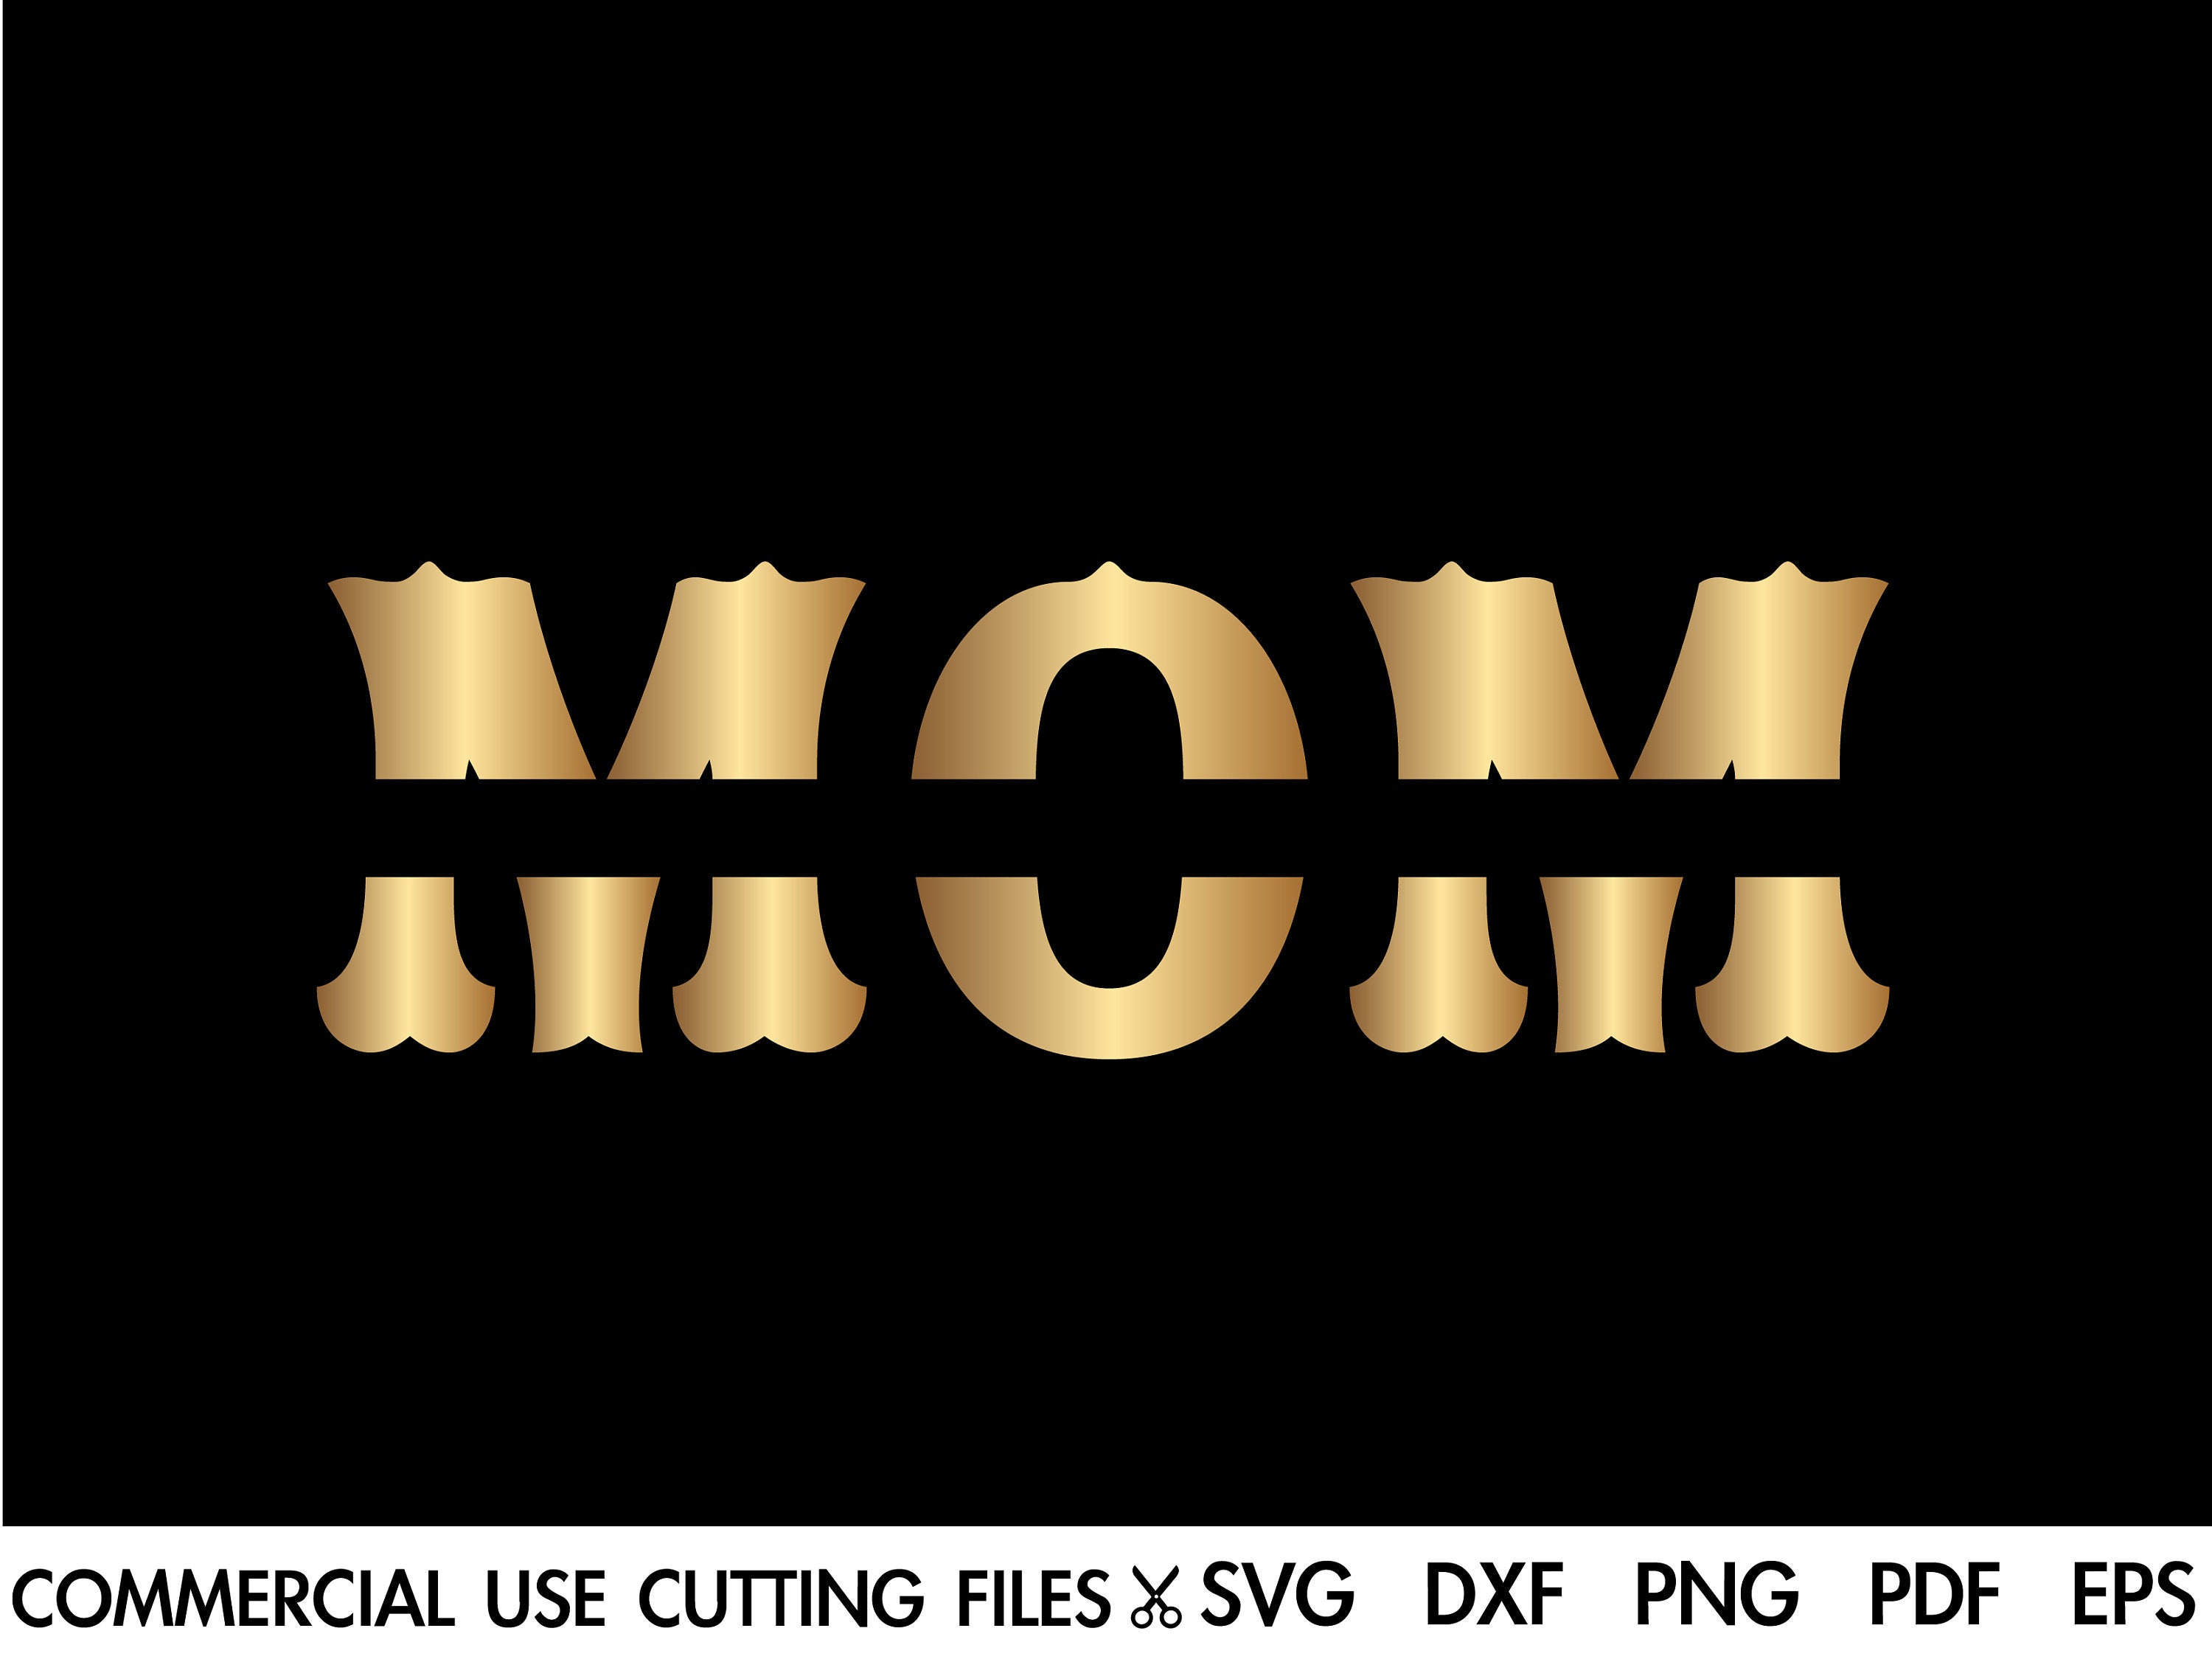 I Have The Best Mom In The World Svg/Eps/Png/Dxf/Jpg/Pdf, Mom Life Svg,  Best Mom Quote, Mother's Day Svg, Mama Svg, Mum Cricut, Mum Clipart